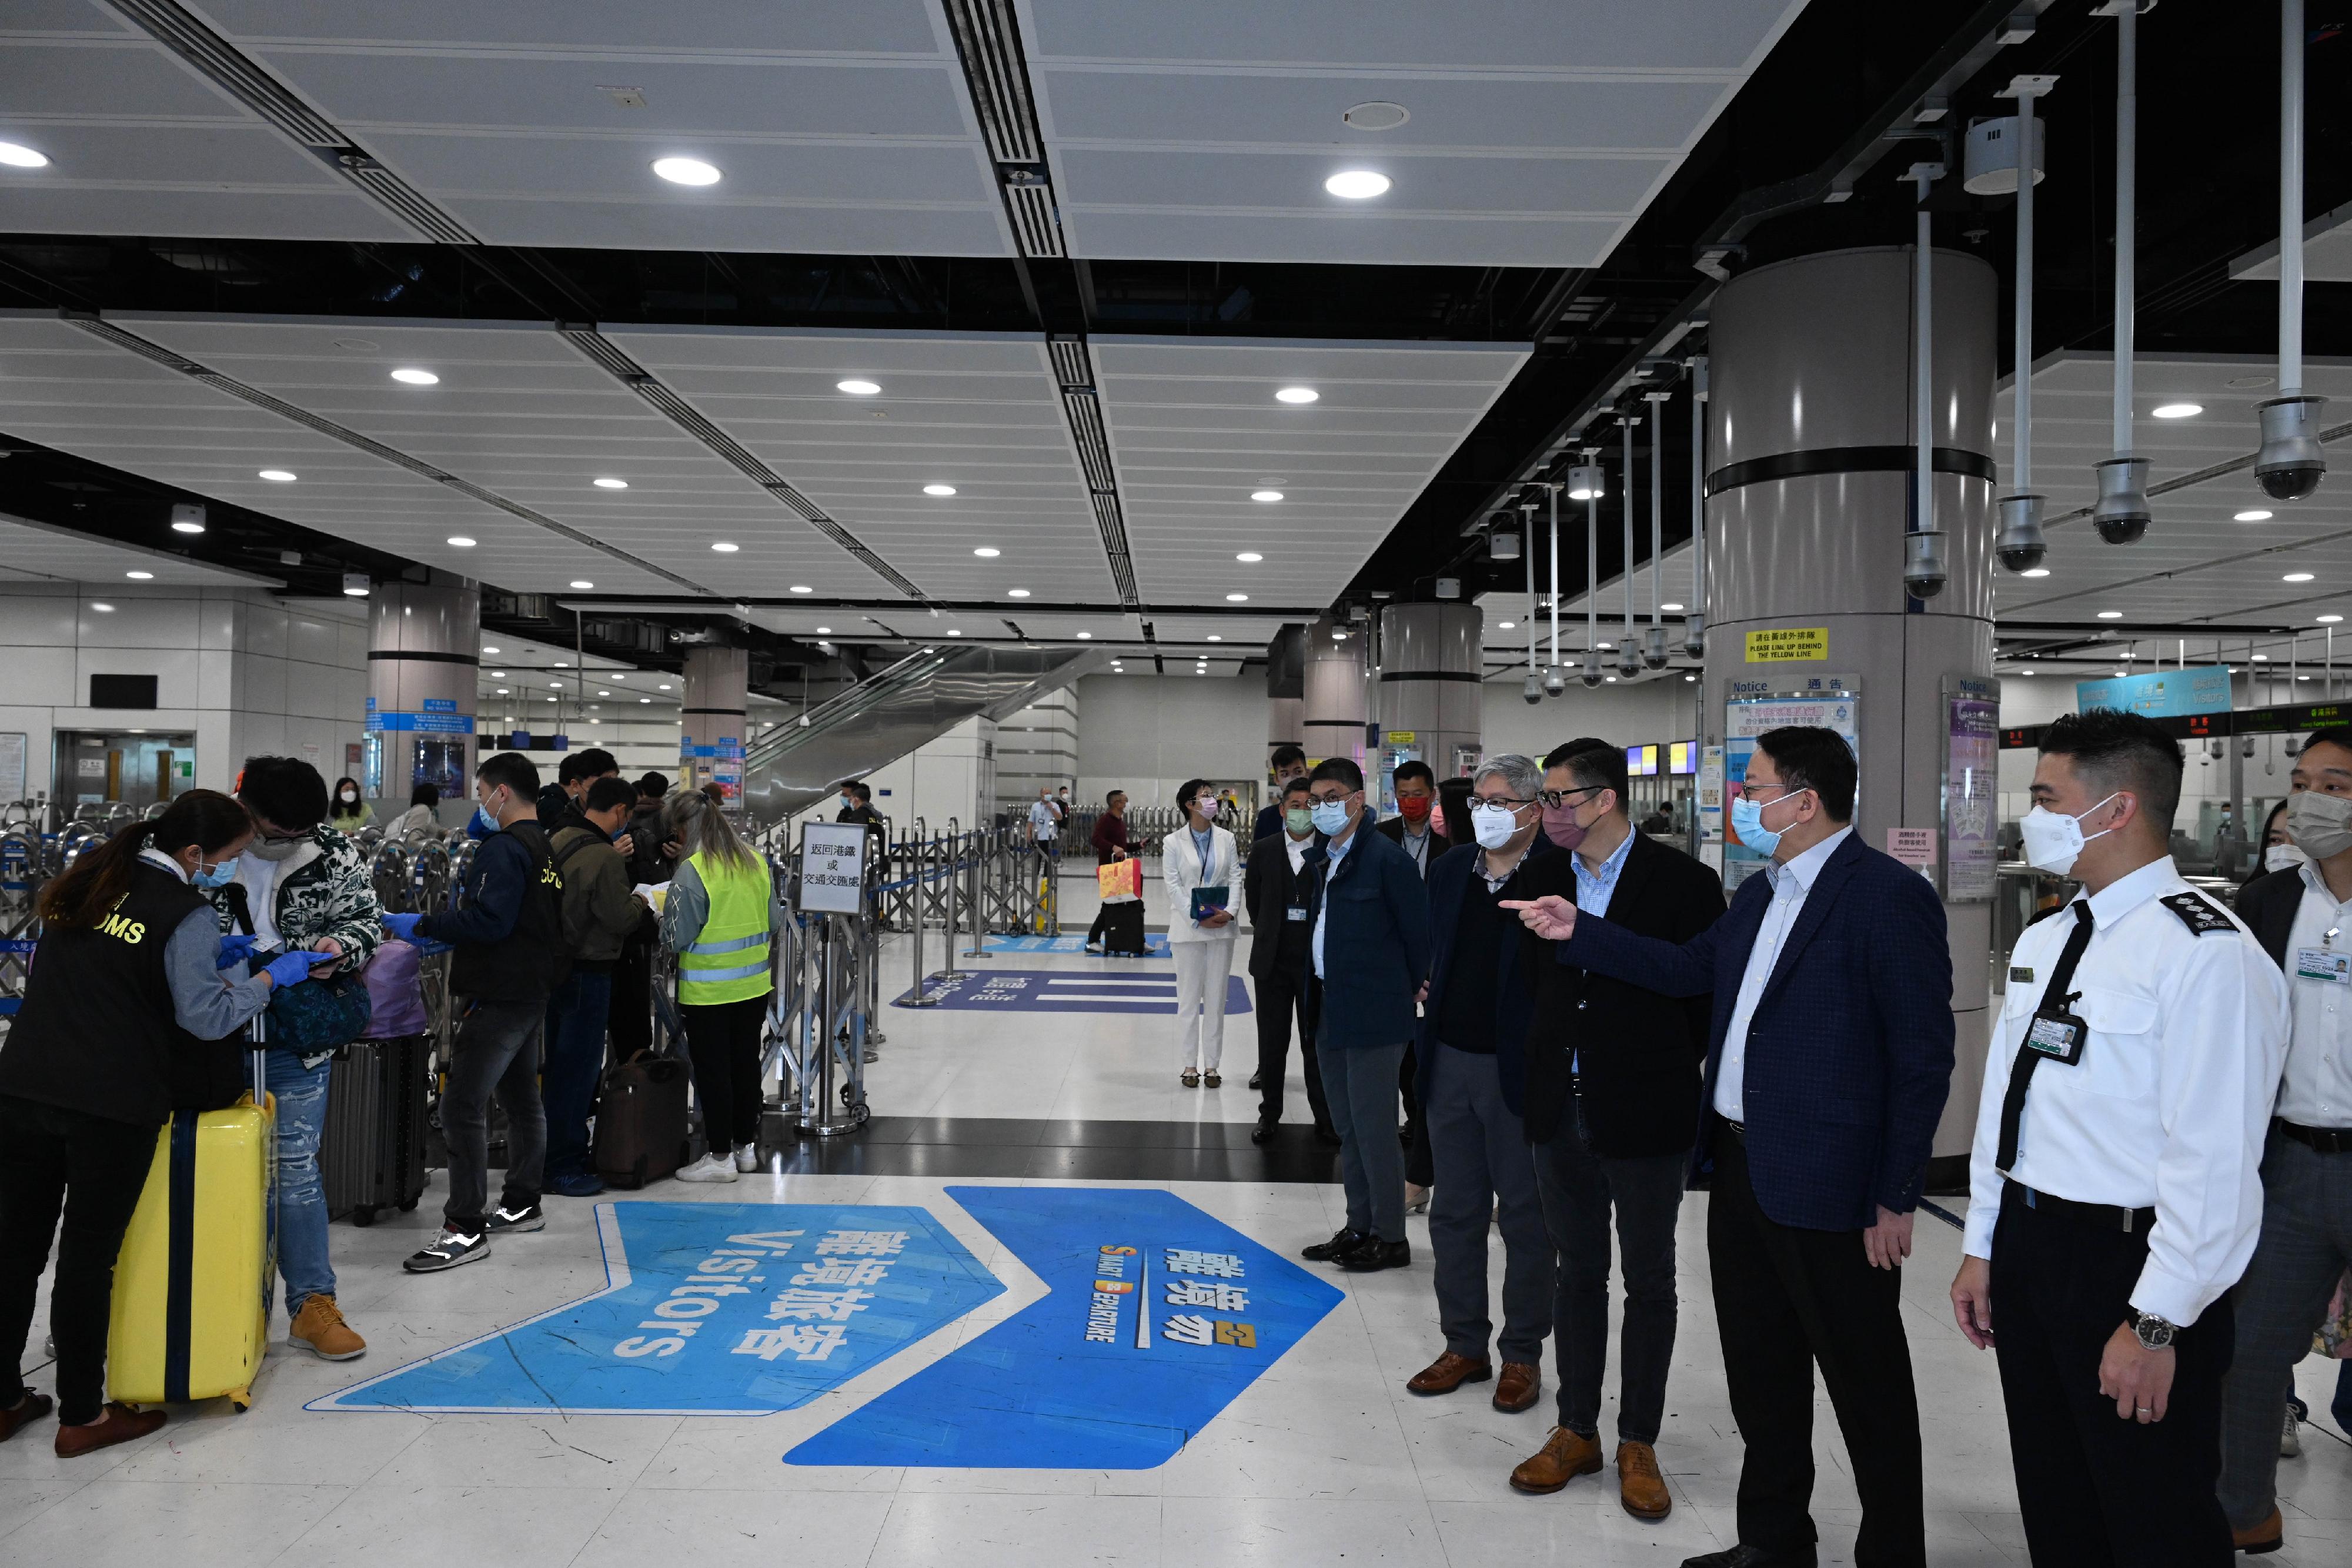 The Chief Secretary for Administration, Mr Chan Kwok-ki, today (January 22), on the first day of the Lunar New Year, visited the Lok Ma Chau Spur Line/Futian Control Point to inspect its operation. Photo shows Mr Chan (third right), accompanied by the Secretary for Security, Mr Tang Ping-keung (fourth right), and the Director of Immigration, Mr Au Ka-wang (fifth right), learning about the overall arrangements for customs clearance, public order maintenance, etc at the control point during the Lunar New Year period.
